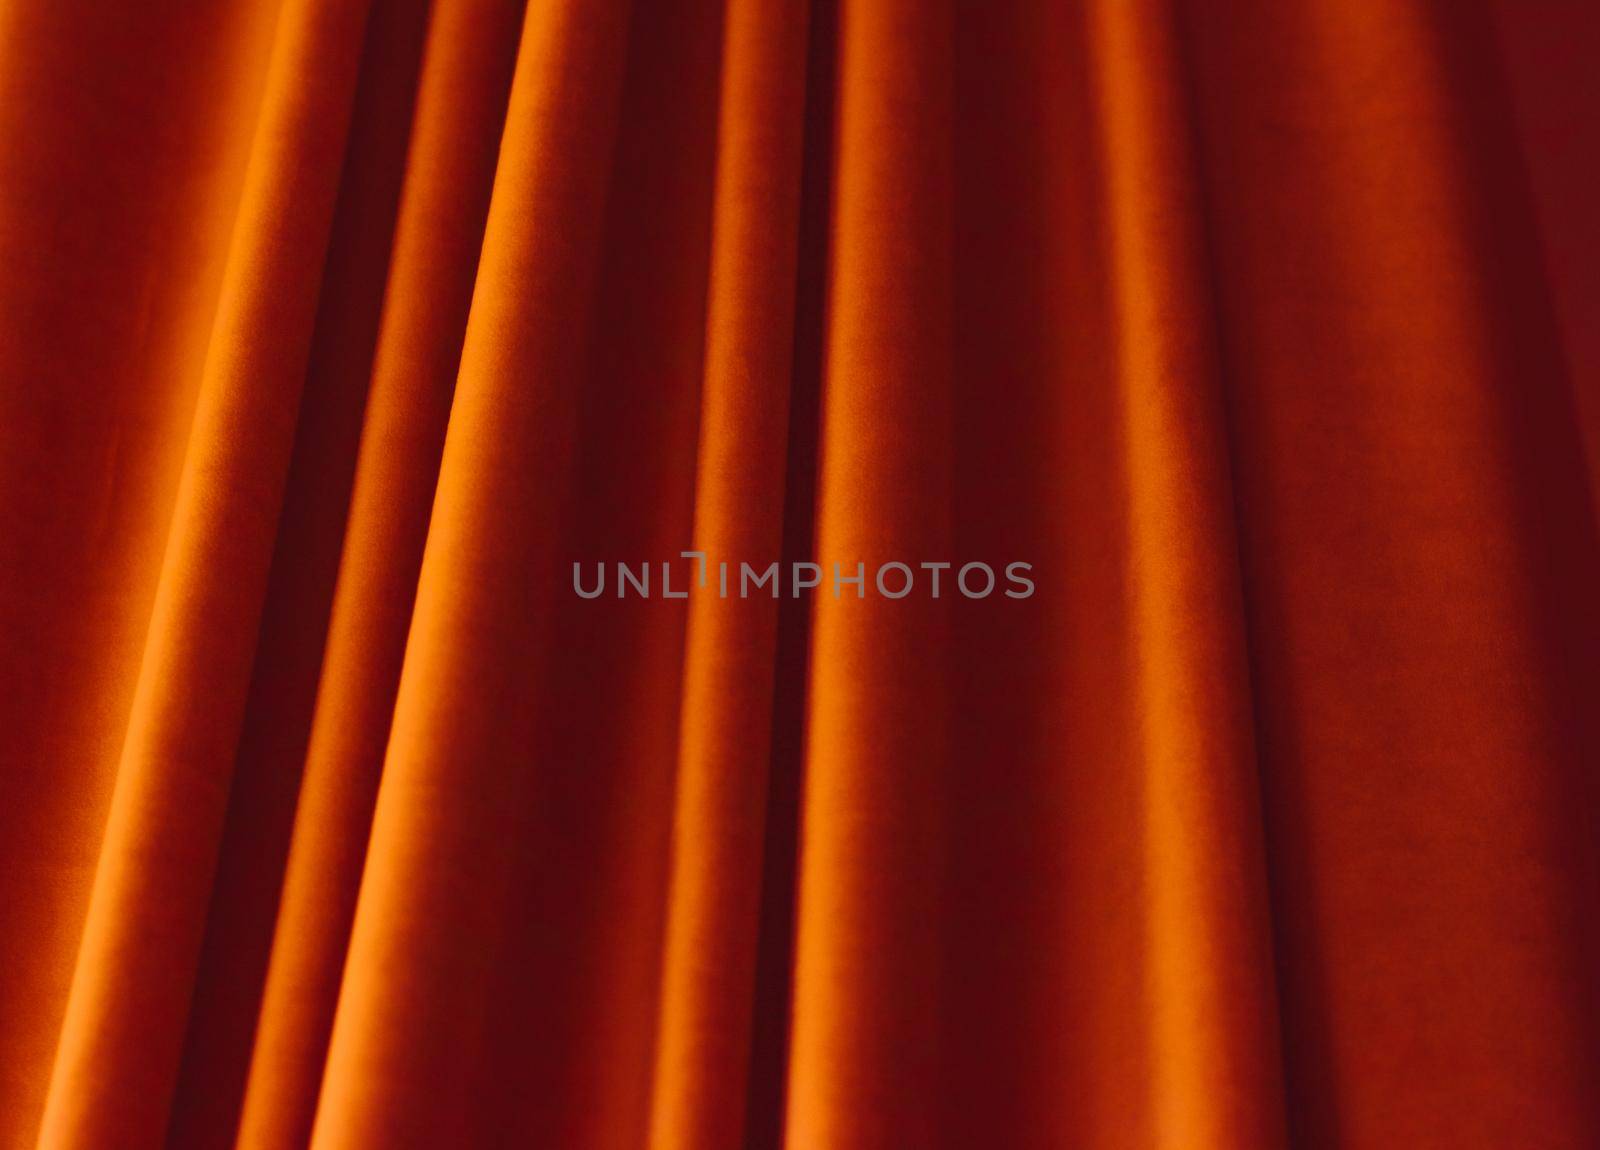 Decoration, branding and surface concept - Abstract orange fabric background, velvet textile material for blinds or curtains, fashion texture and home decor backdrop for luxury interior design brand